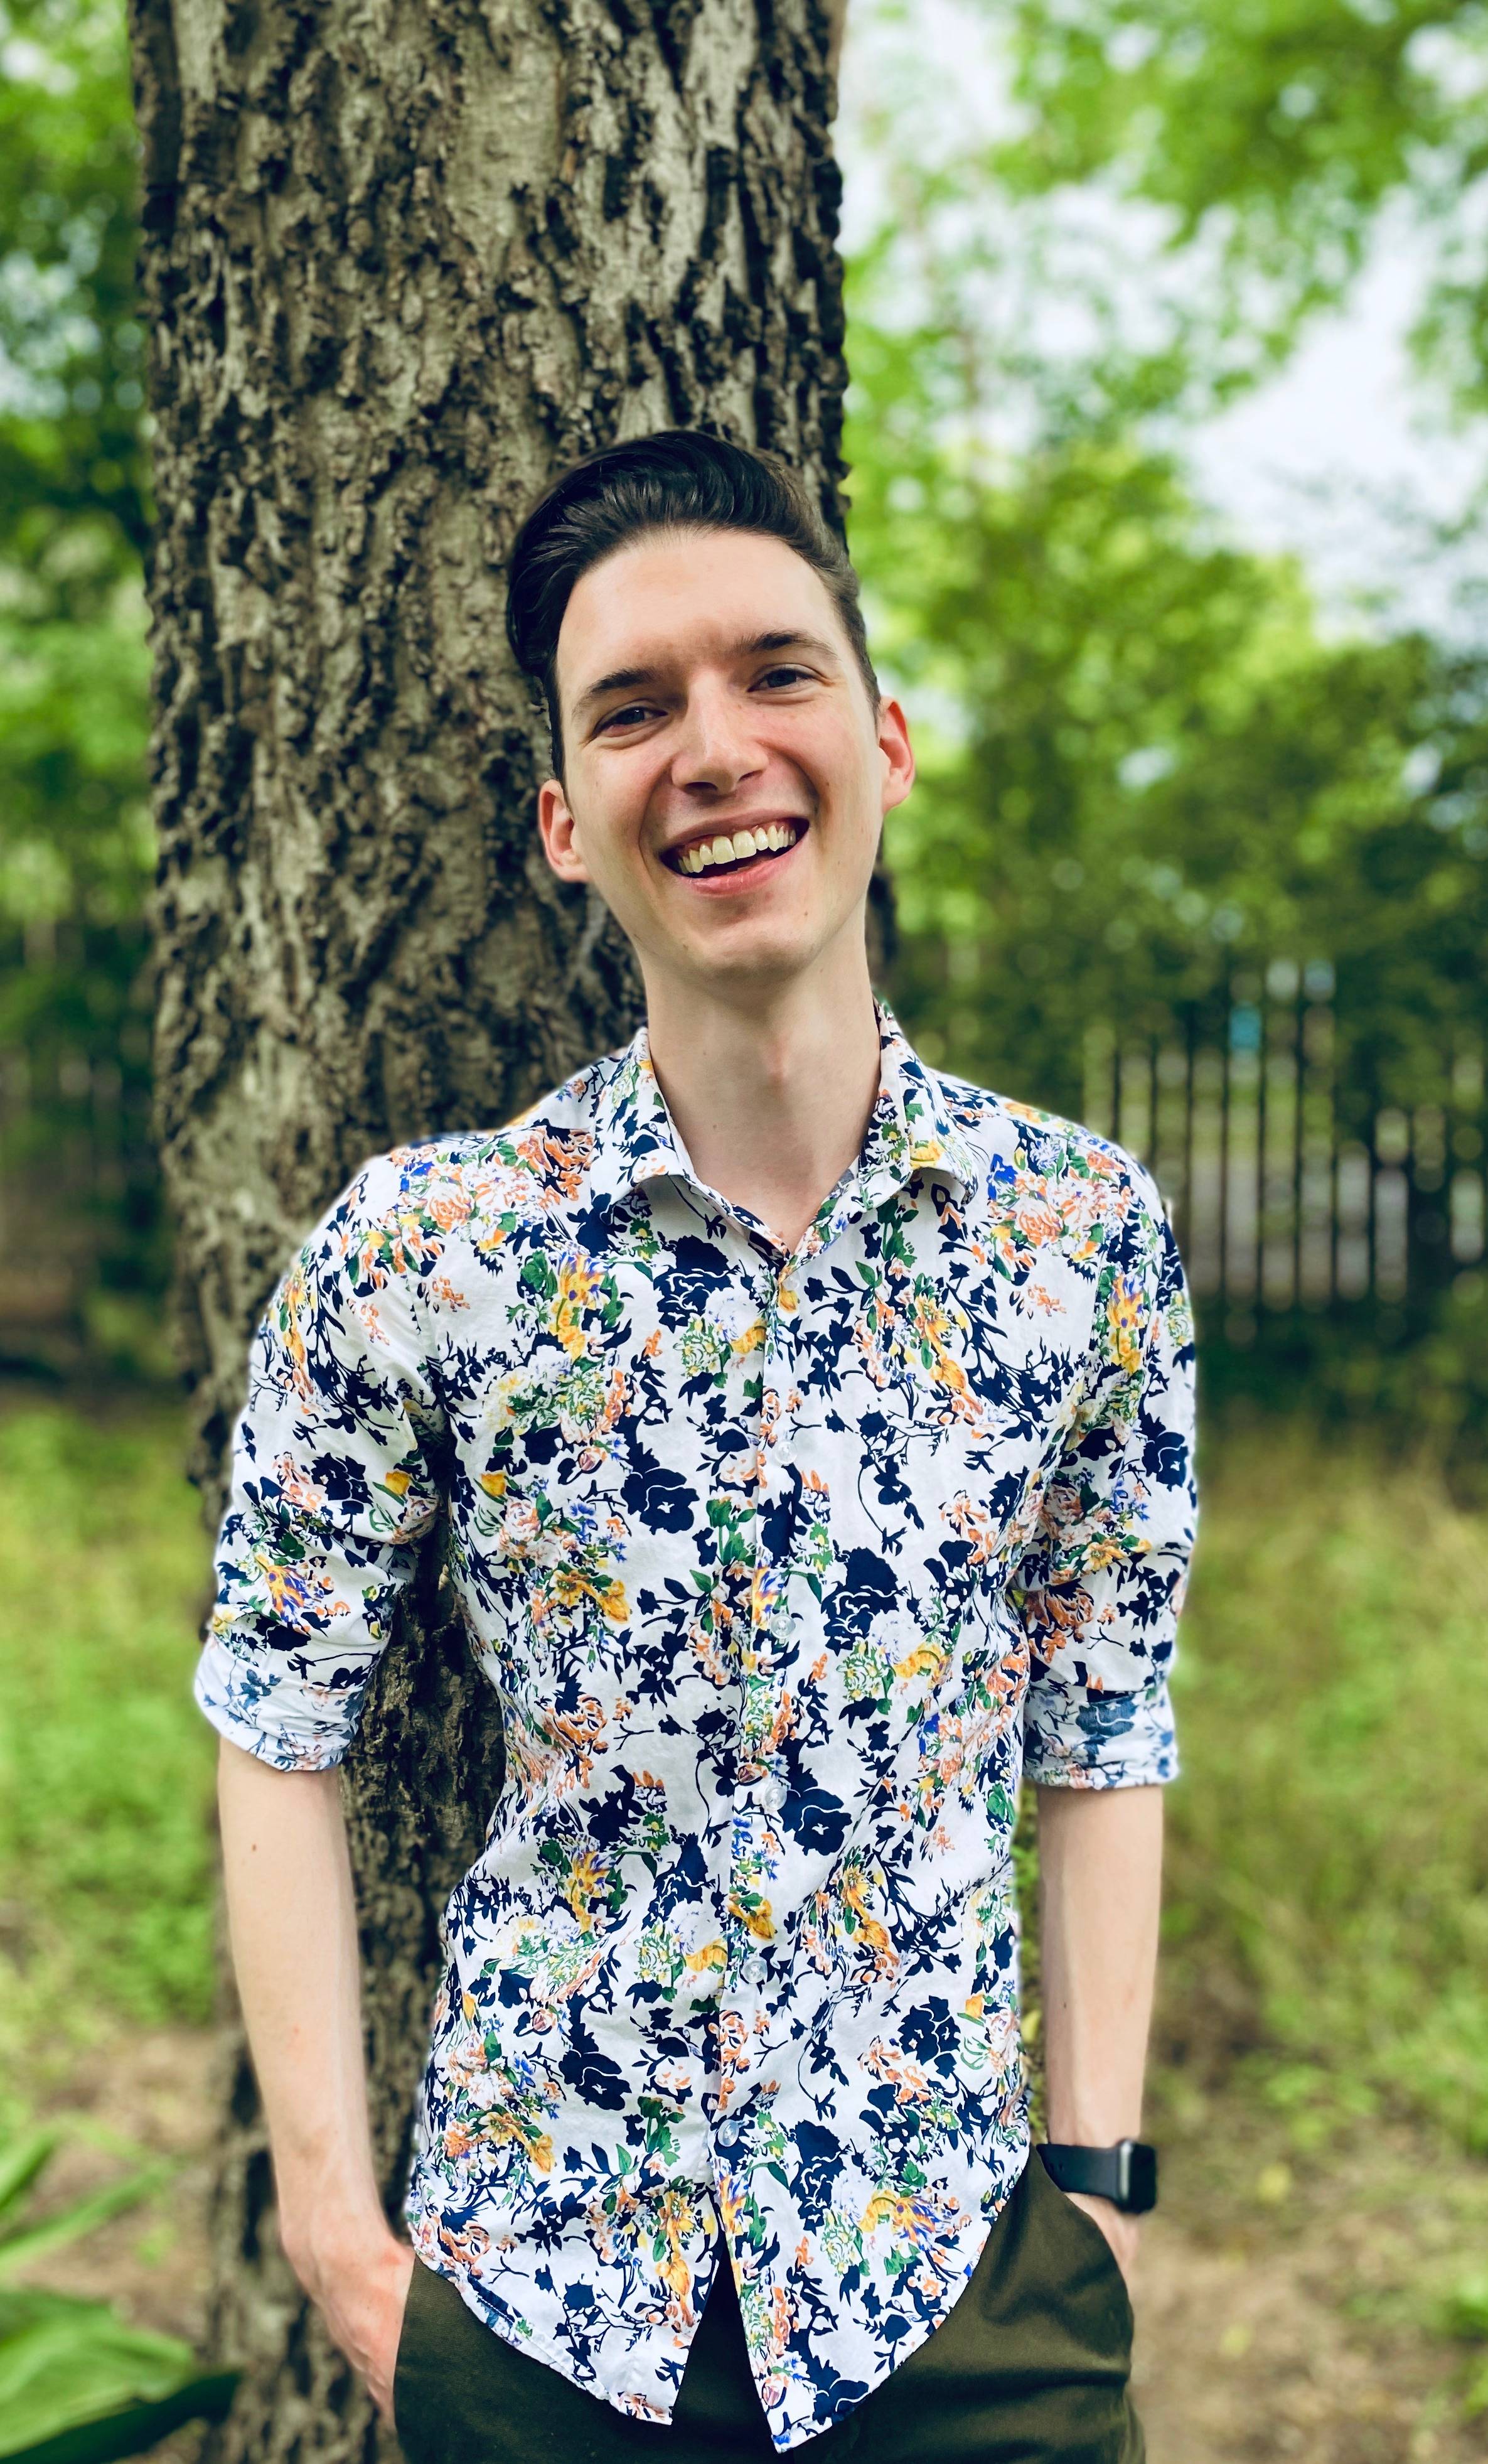 man wearing colorful shirt, leaning against tree